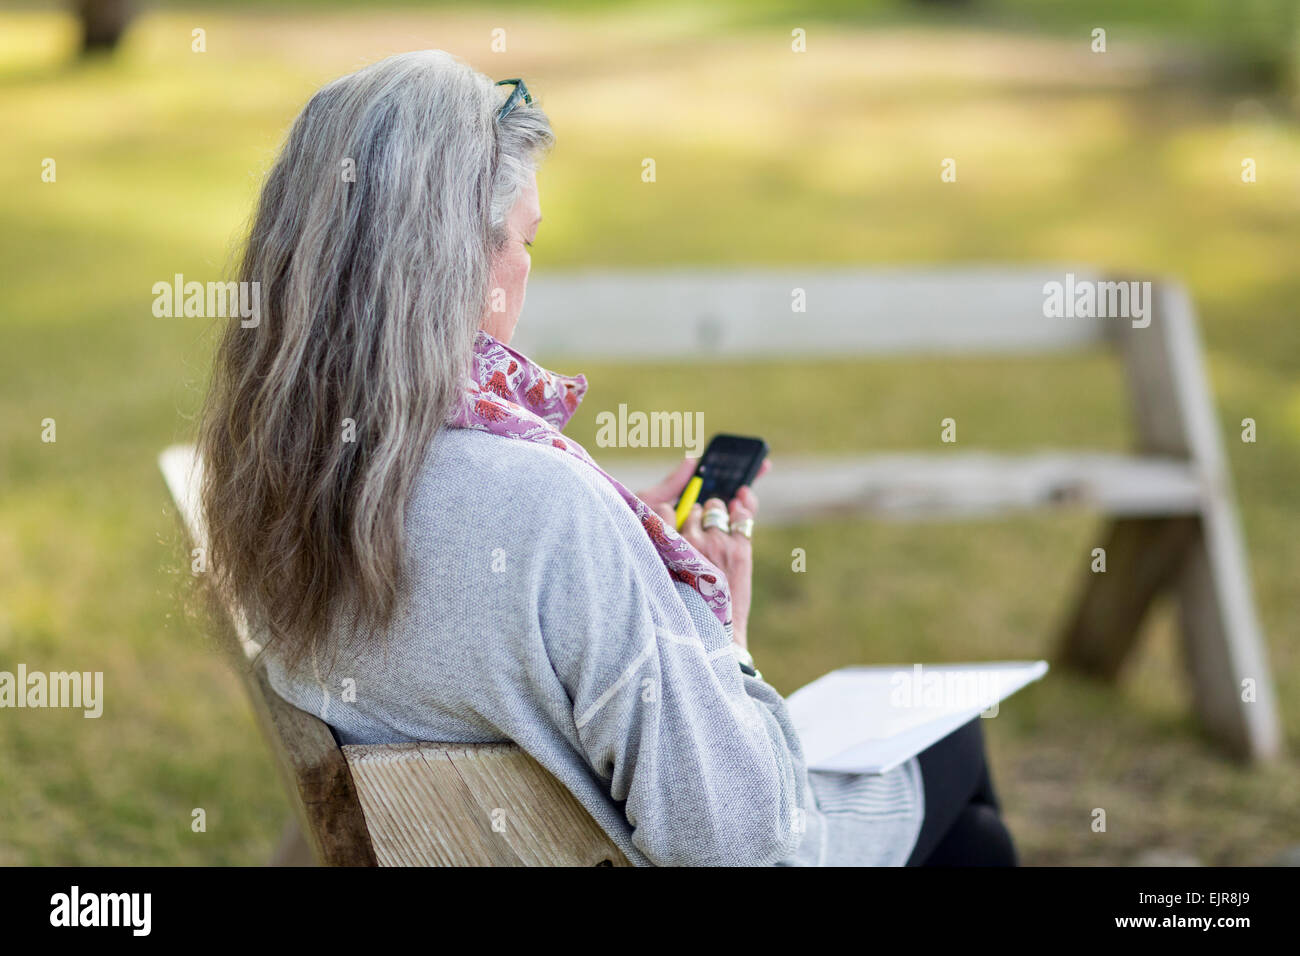 Older Caucasian woman using cell phone outdoors Stock Photo